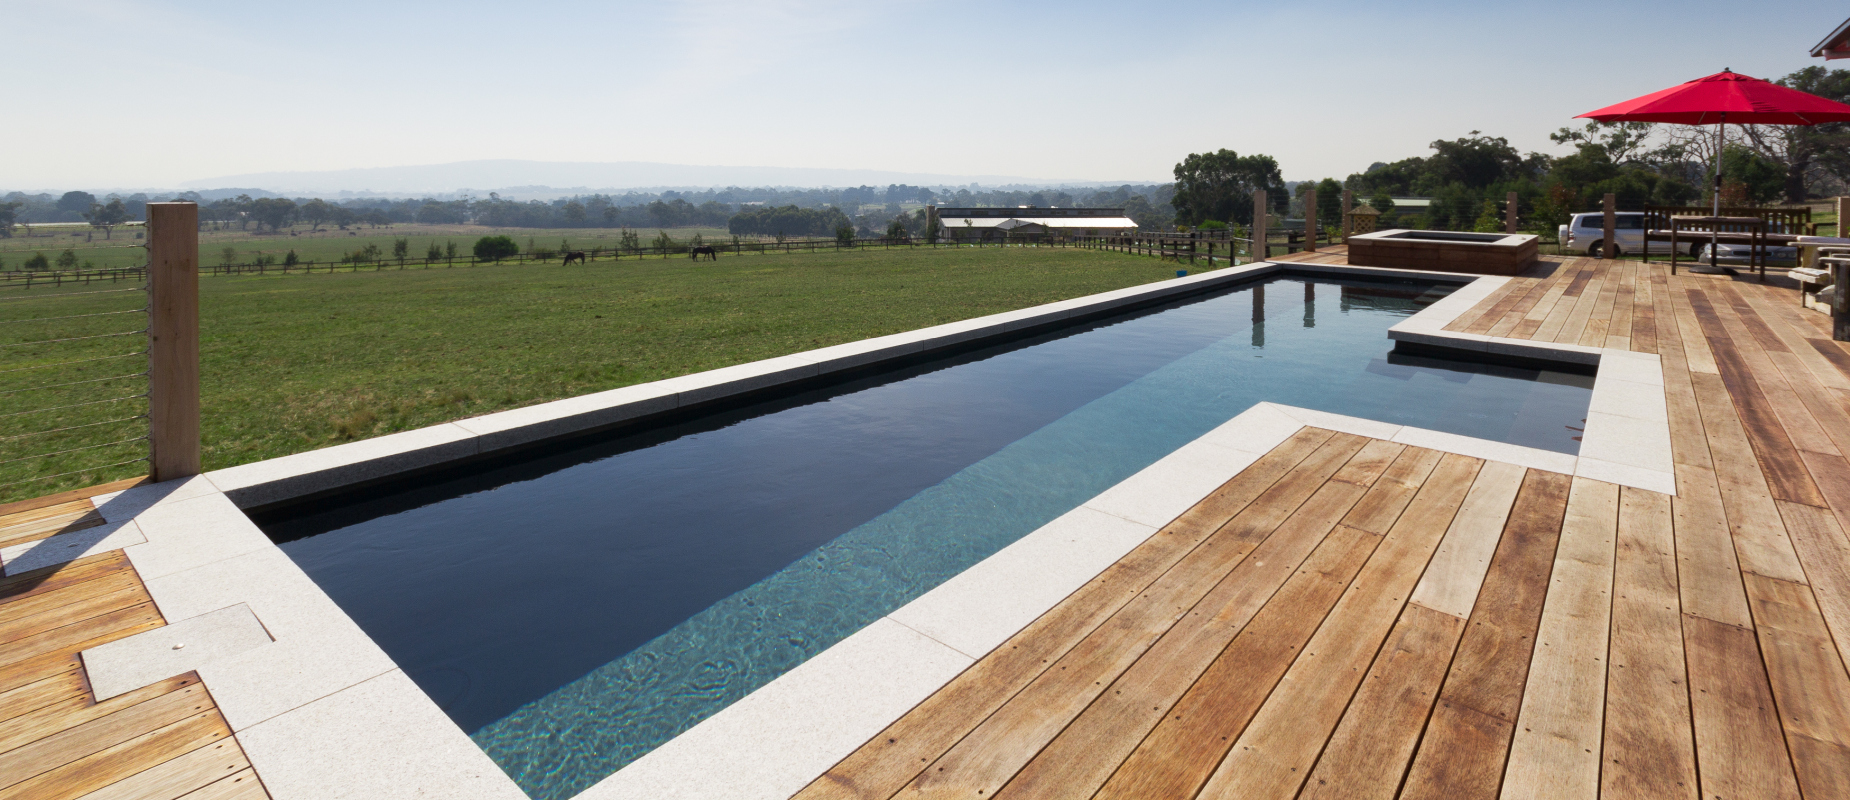 Compass-Pools-Australia_Fastlane-lap-pool-with-timber-decking